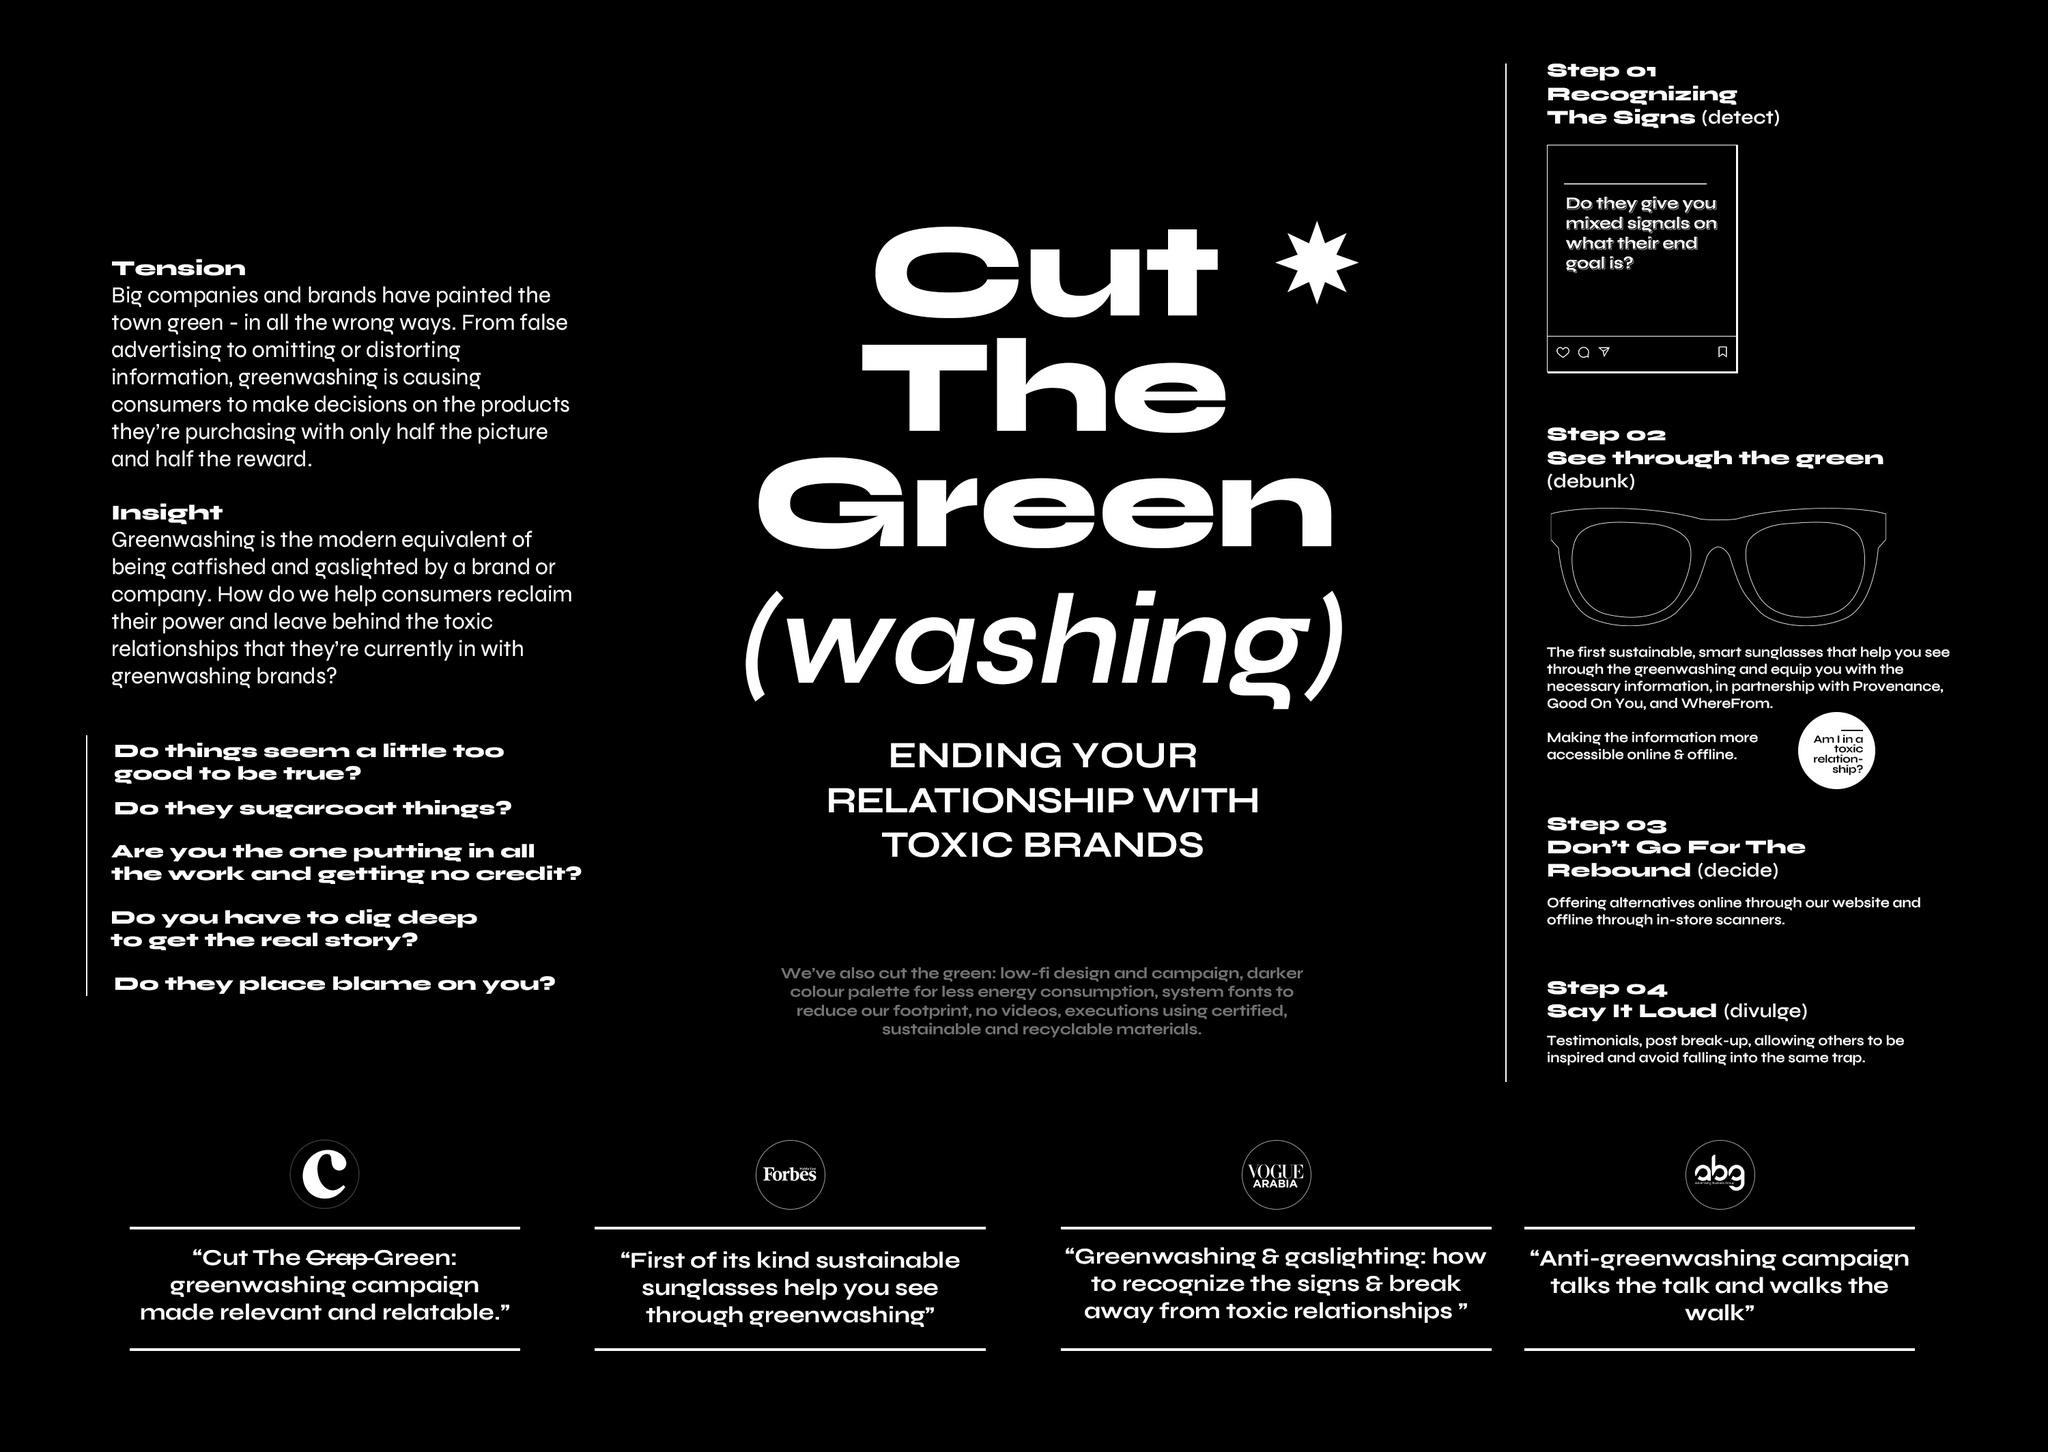 Cut The Green: ending your toxic relationship with greenwashing brands